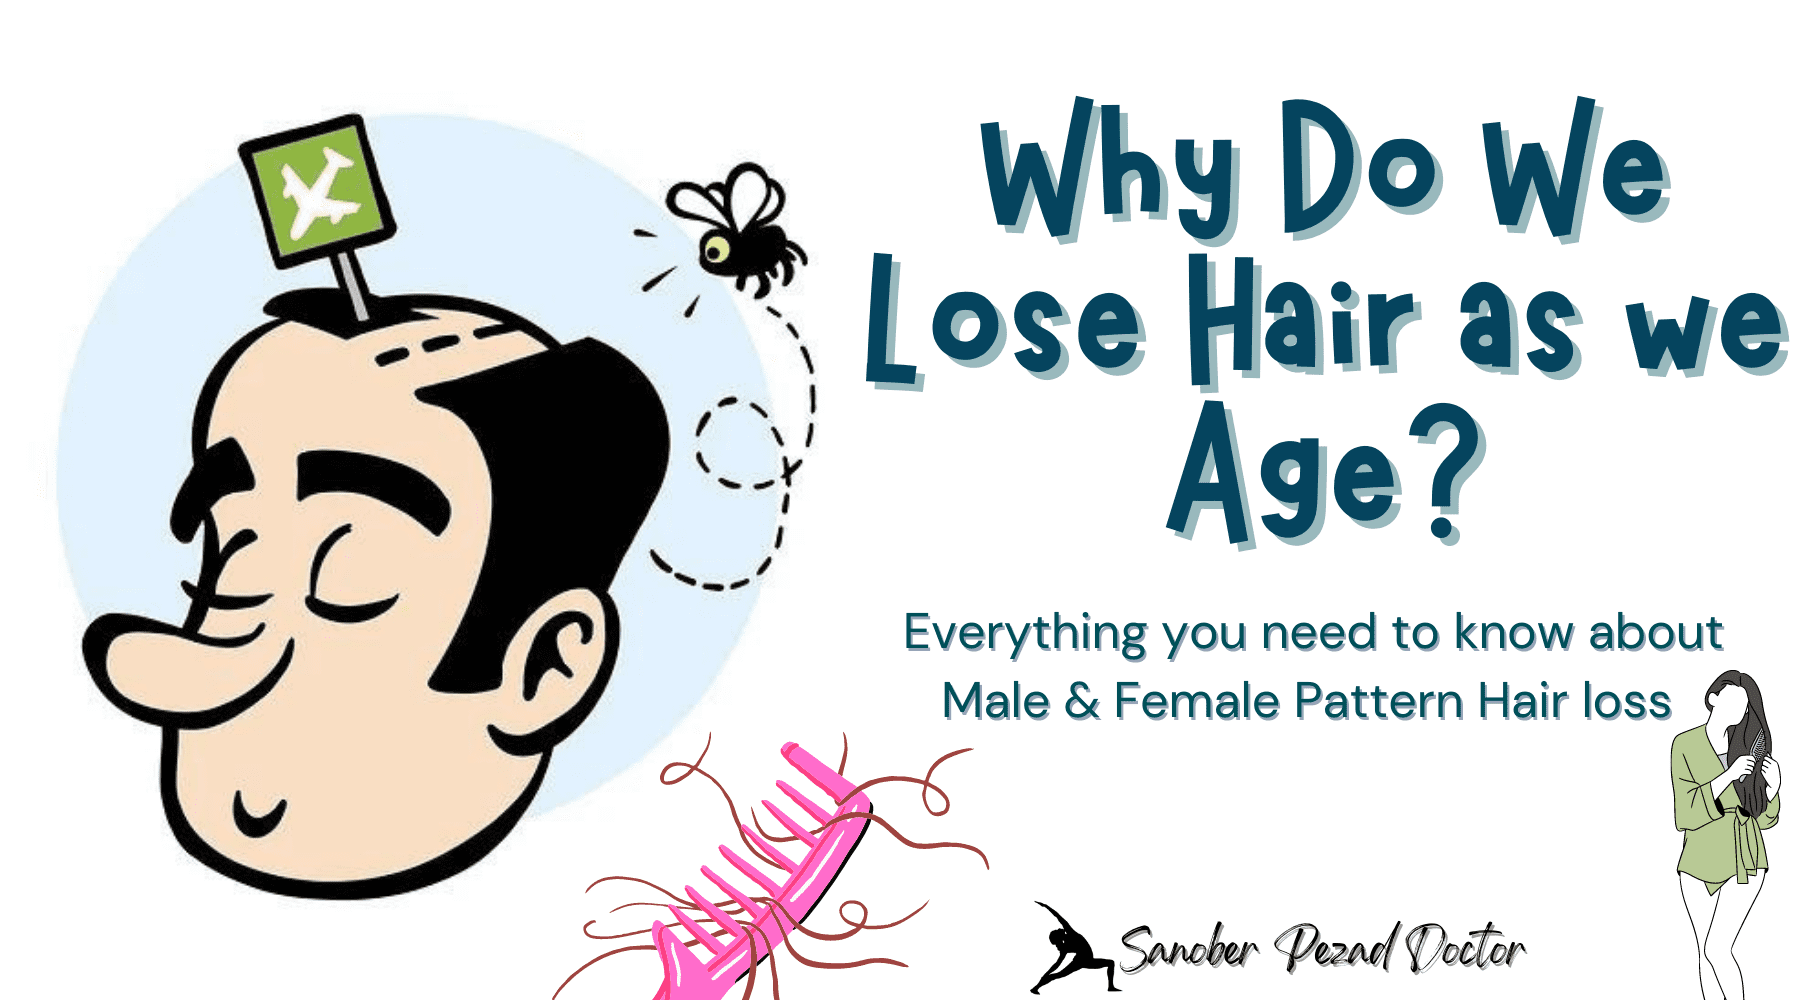 Why Do We Lose Hair as we Age?- Everything you need to know about Male & Female Pattern Hair loss (Androgenetic Alopecia)